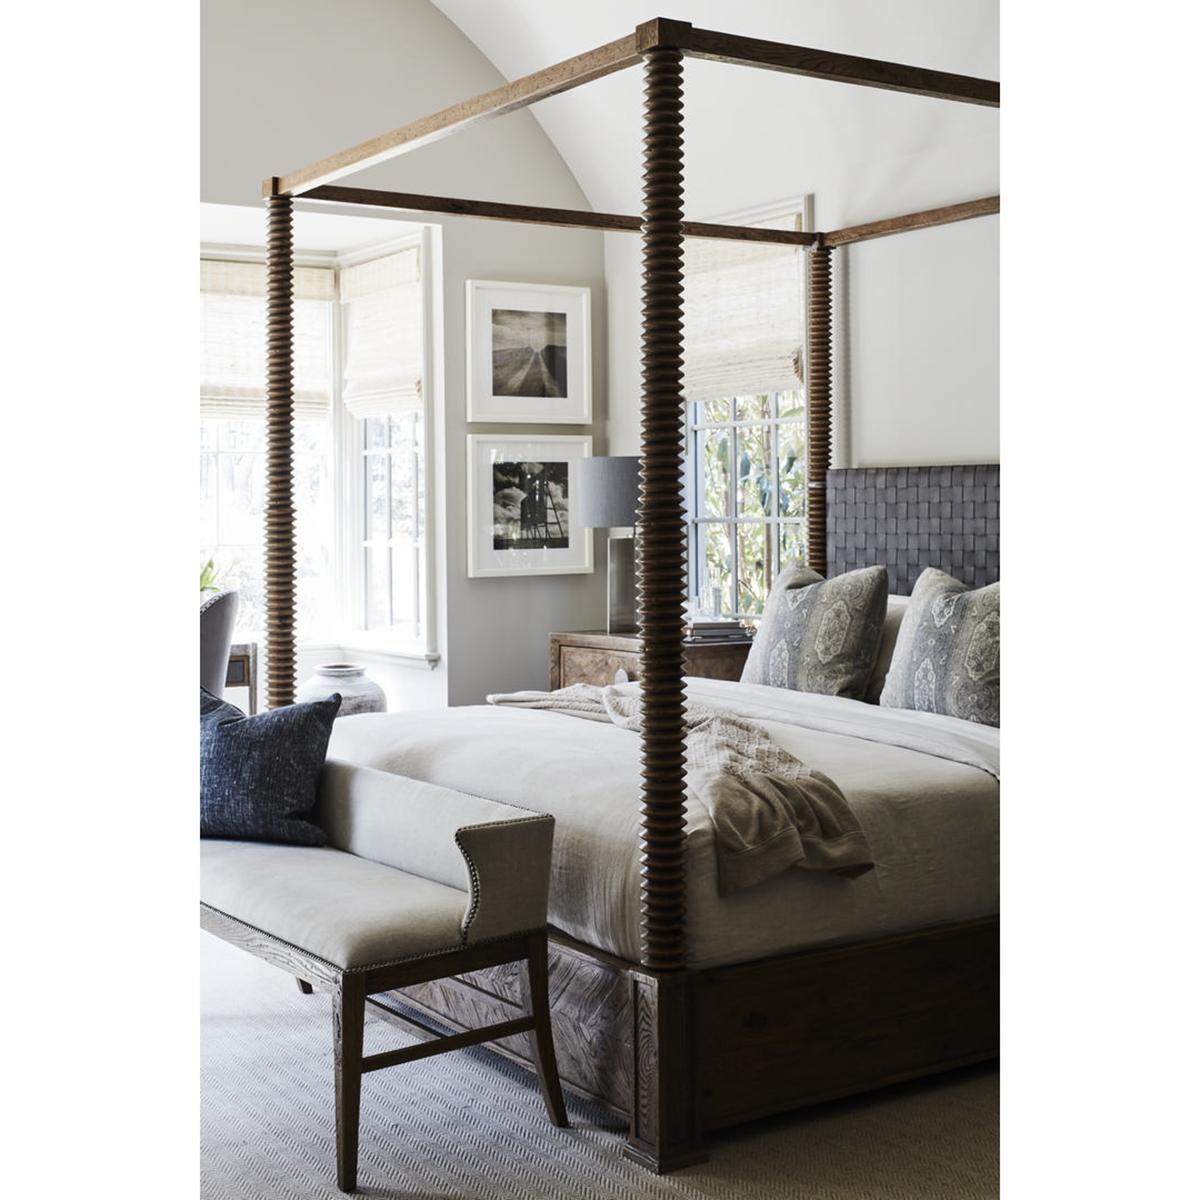 Four poster king size bed with turned oak posts, rustic oak paneled rails and parquetry footboard with hand-woven leather lattice headboard and an integrated 'Vintage' metal headboard supports.

Dimensions: 84.75